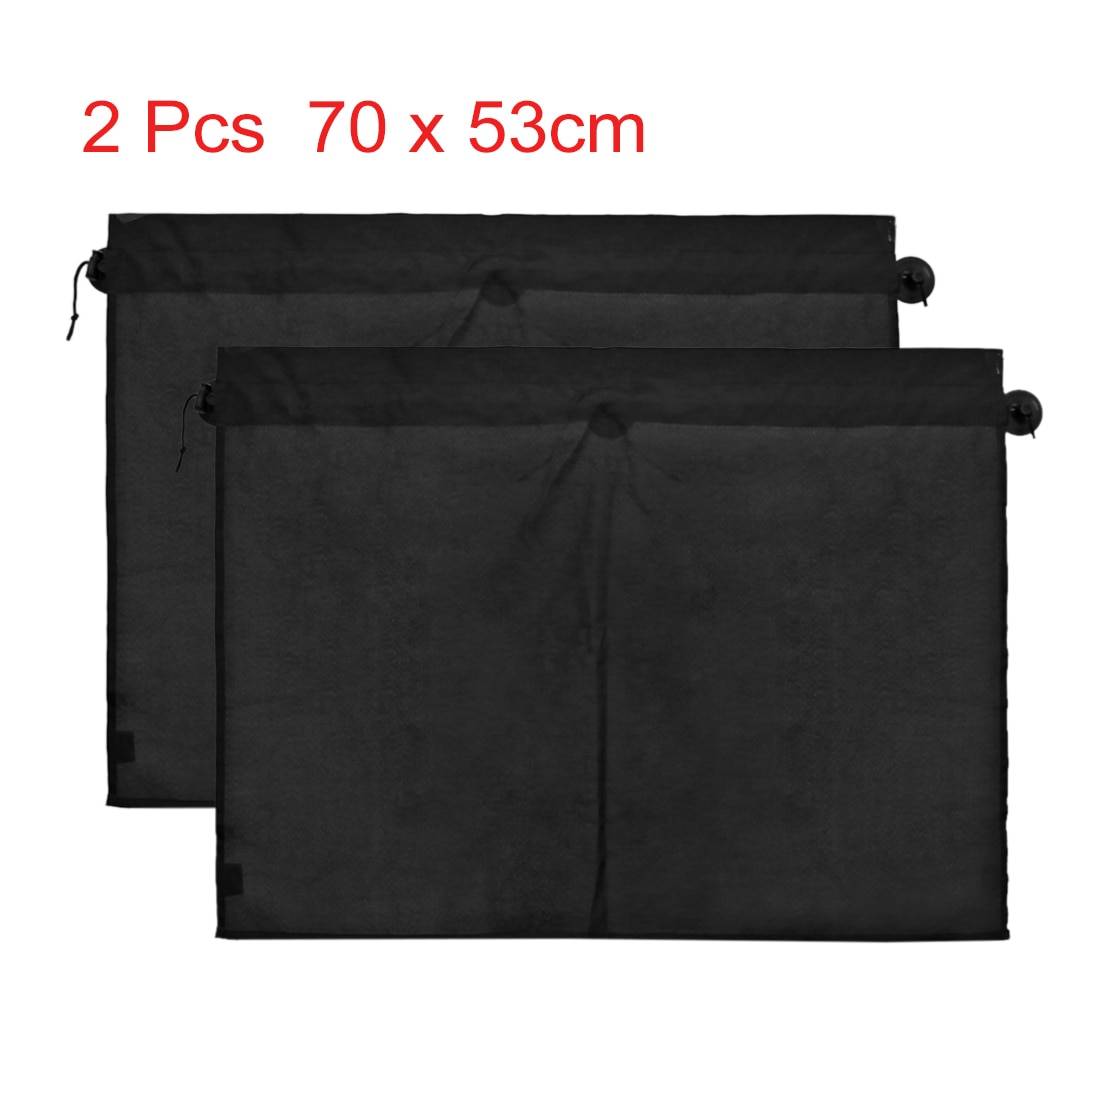 UV Protection Windscreen Cover for Car Car Covers Car Extras & Accessories